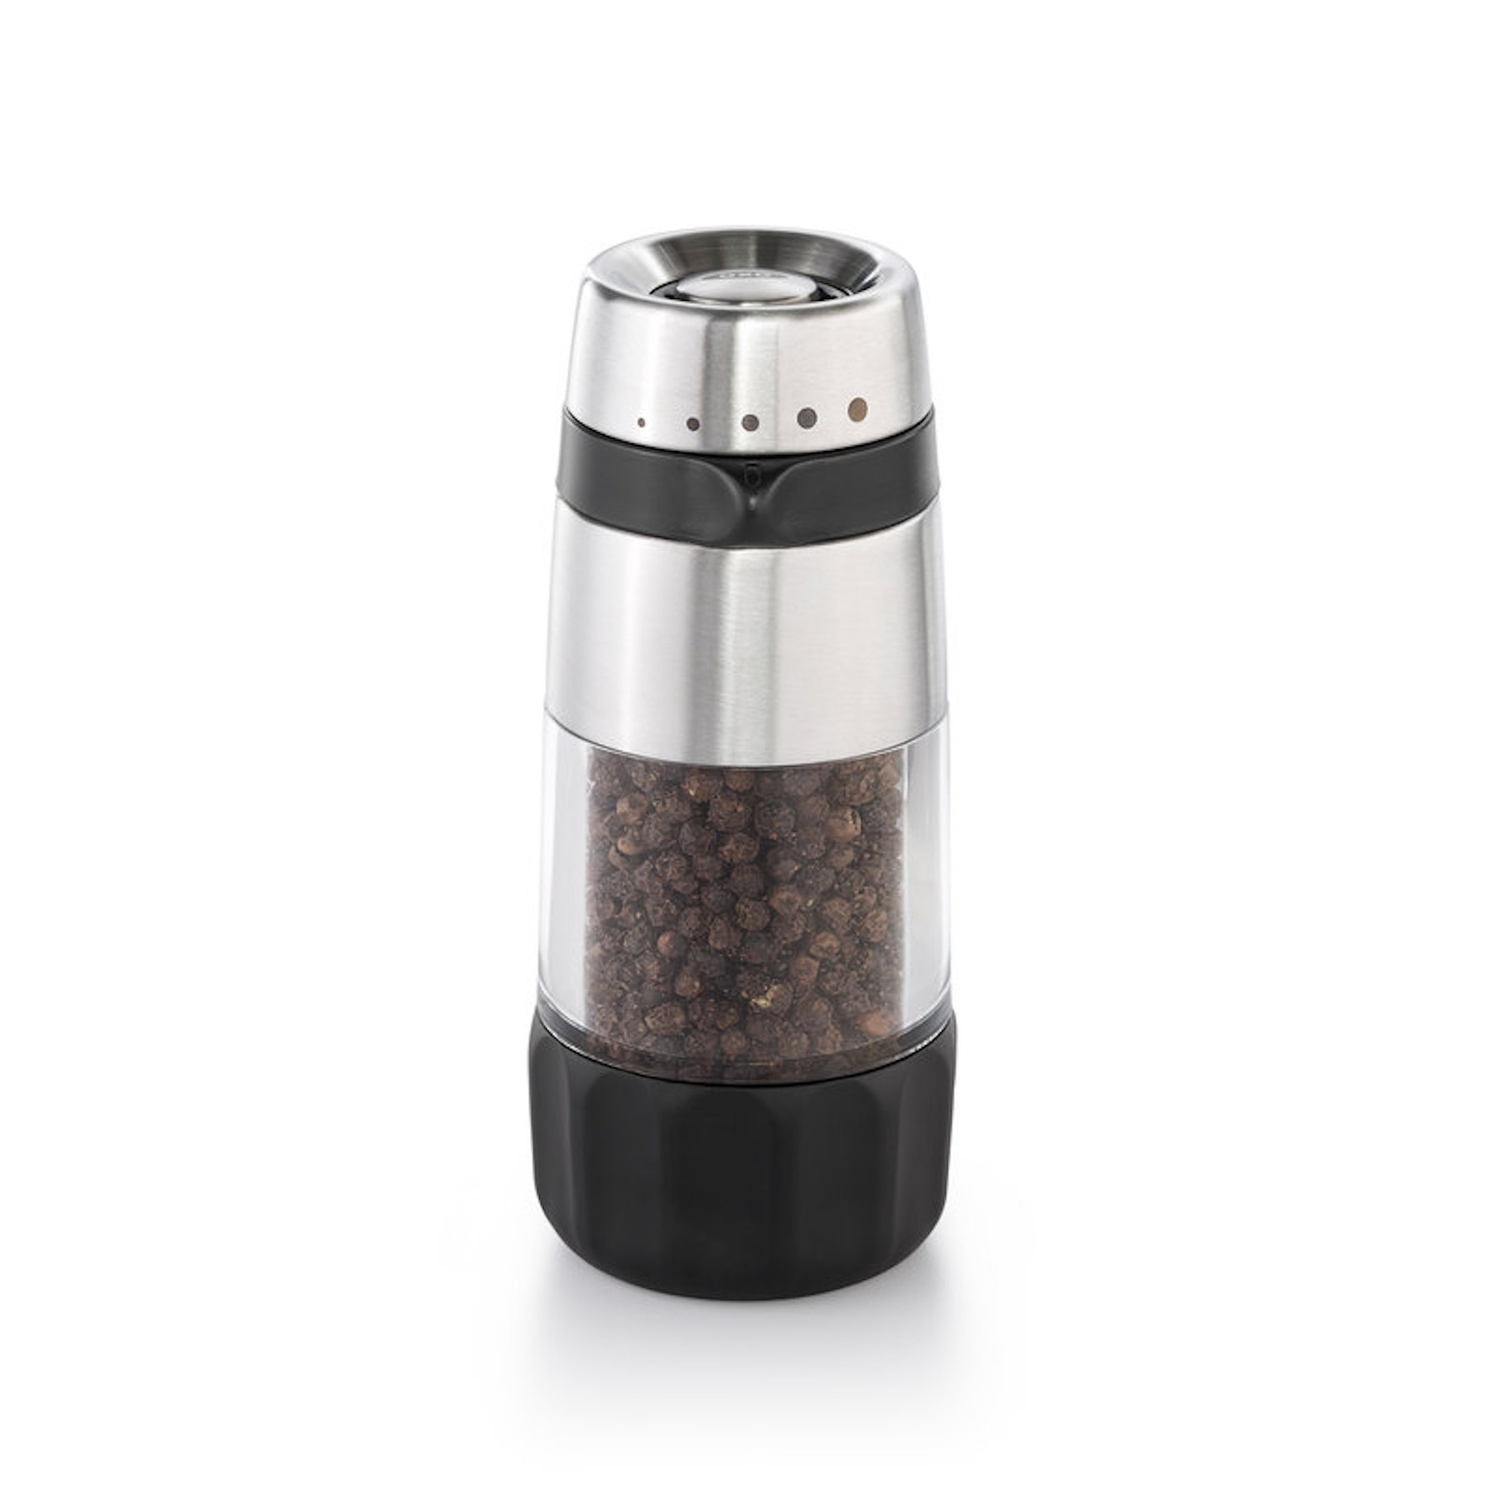 Photos - Other Accessories Oxo Good Grips Black Plastic/Stainless Steel Pepper Grinder 1.94 oz 114070 